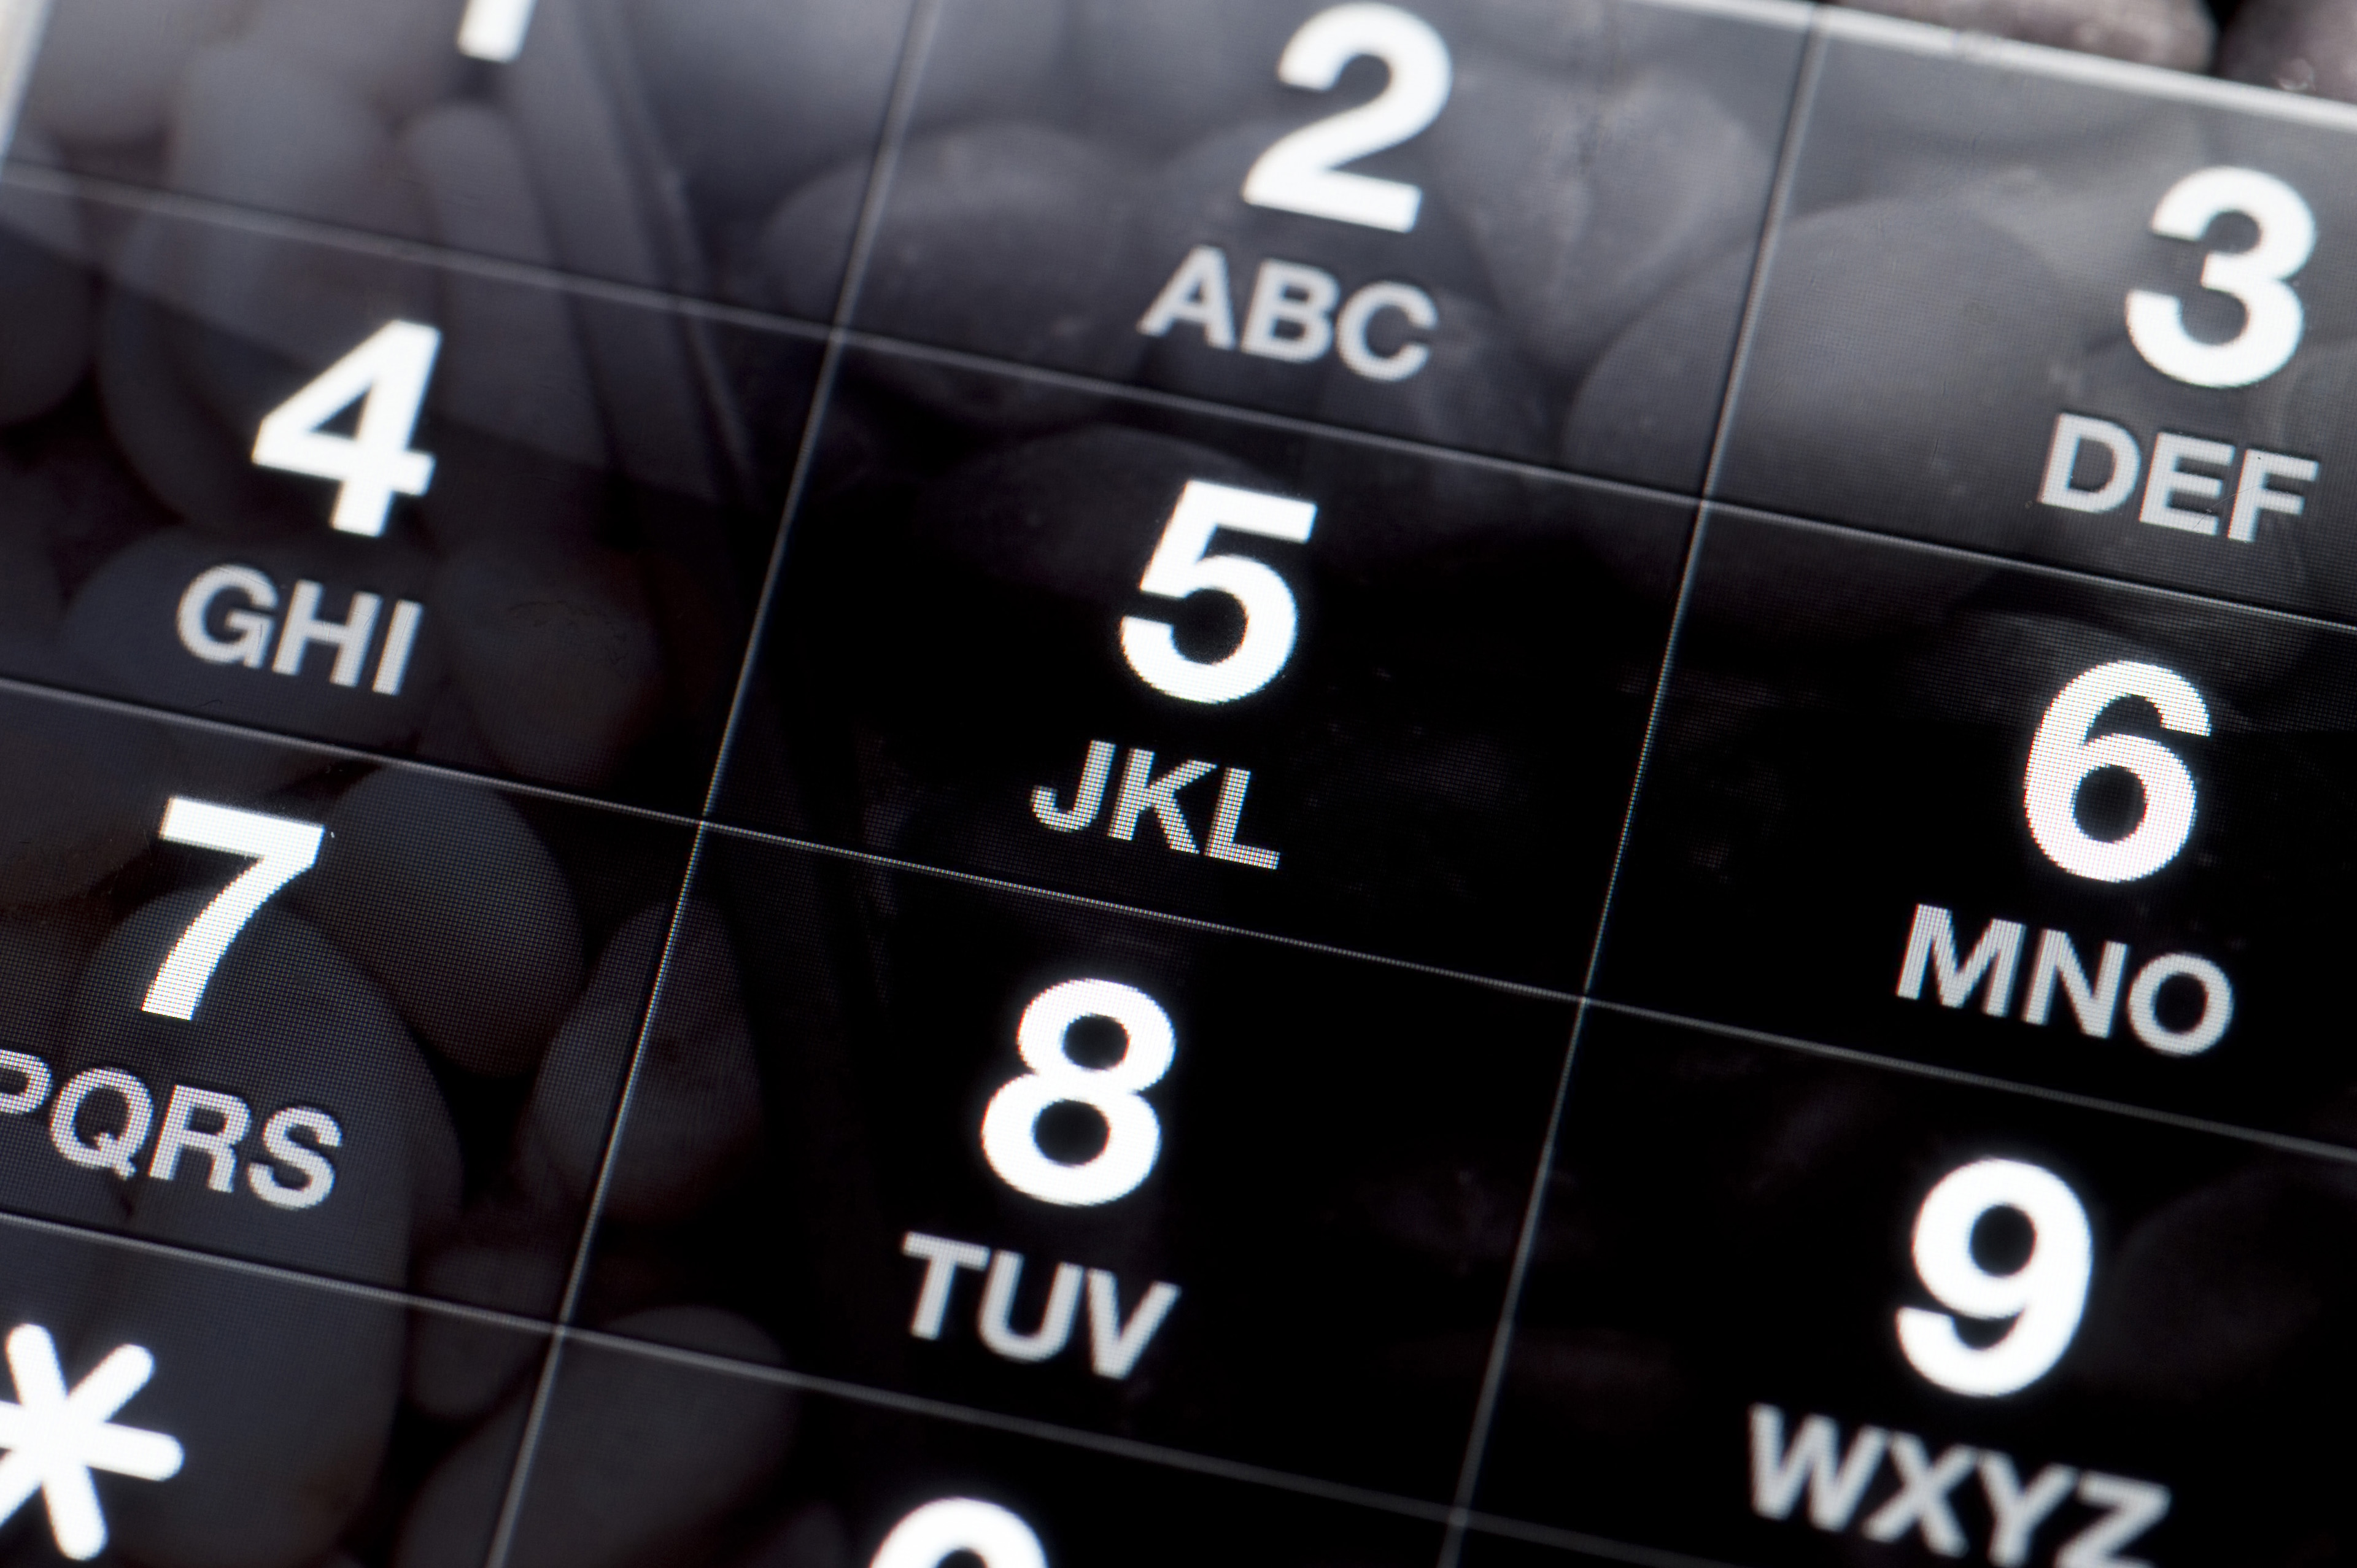 Image of Black and White Dial Pad of a Mobile Phone | Freebie ...